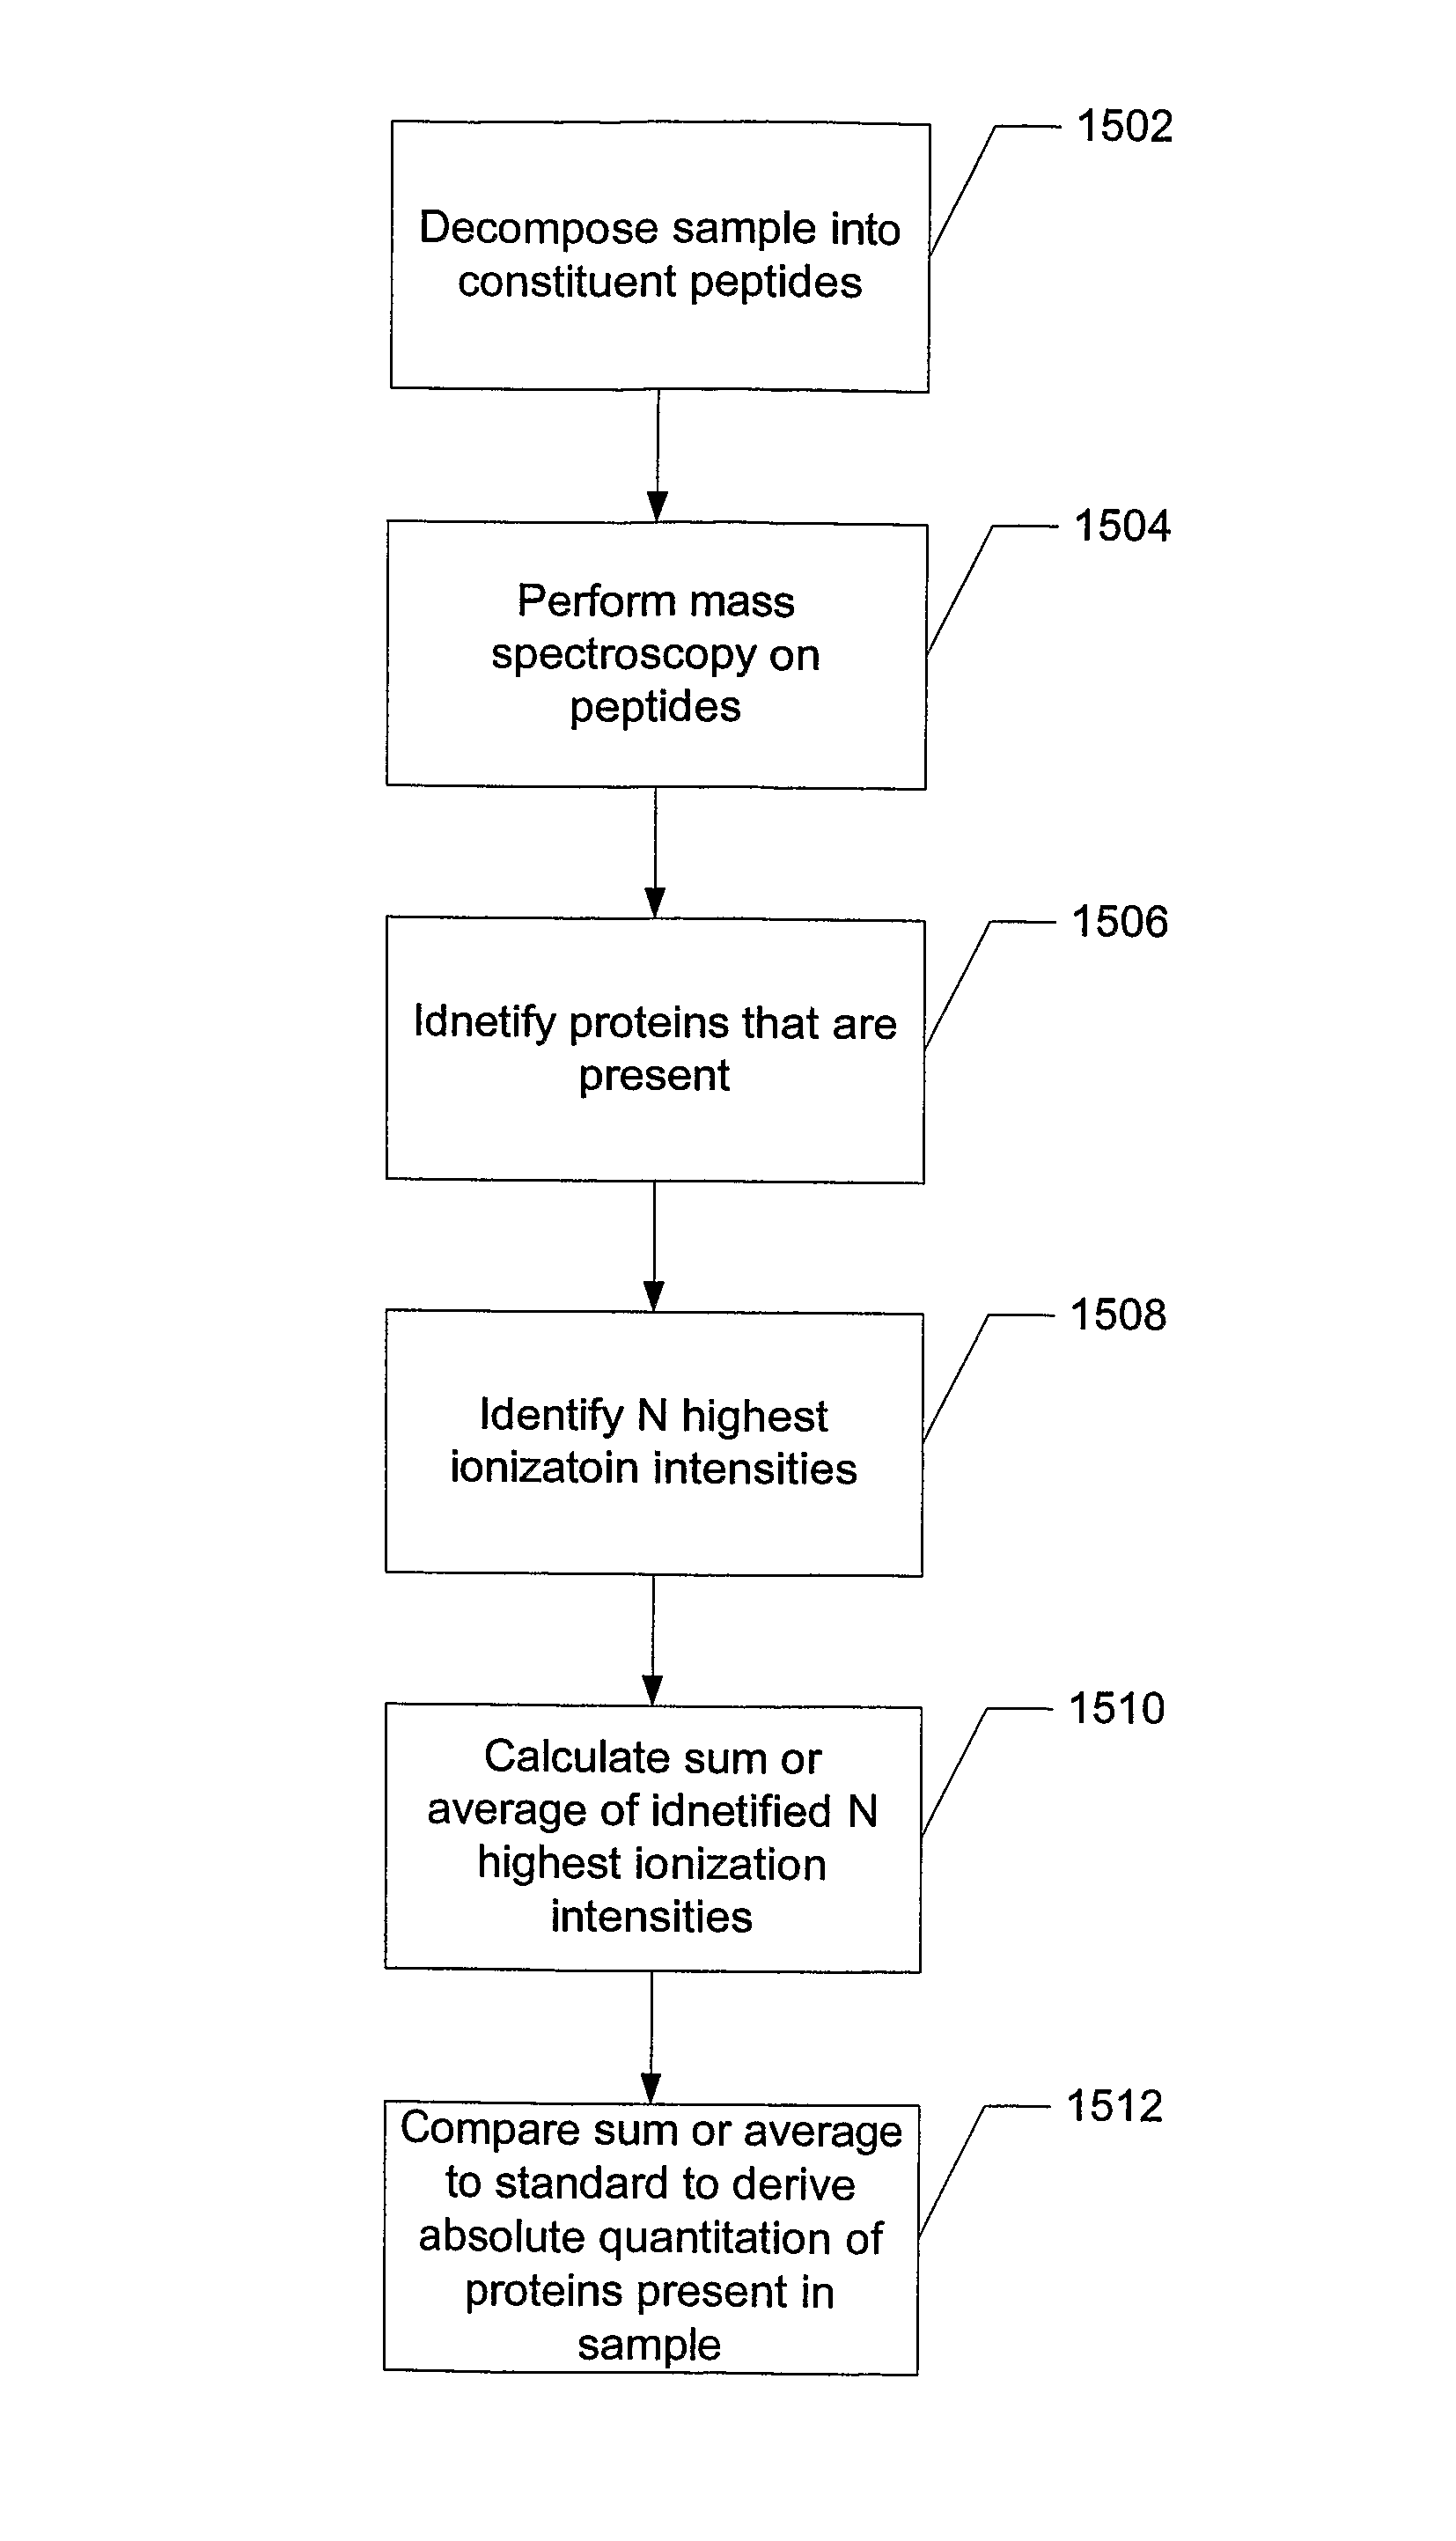 System and method for absolute quantitation of proteins using LC/MS